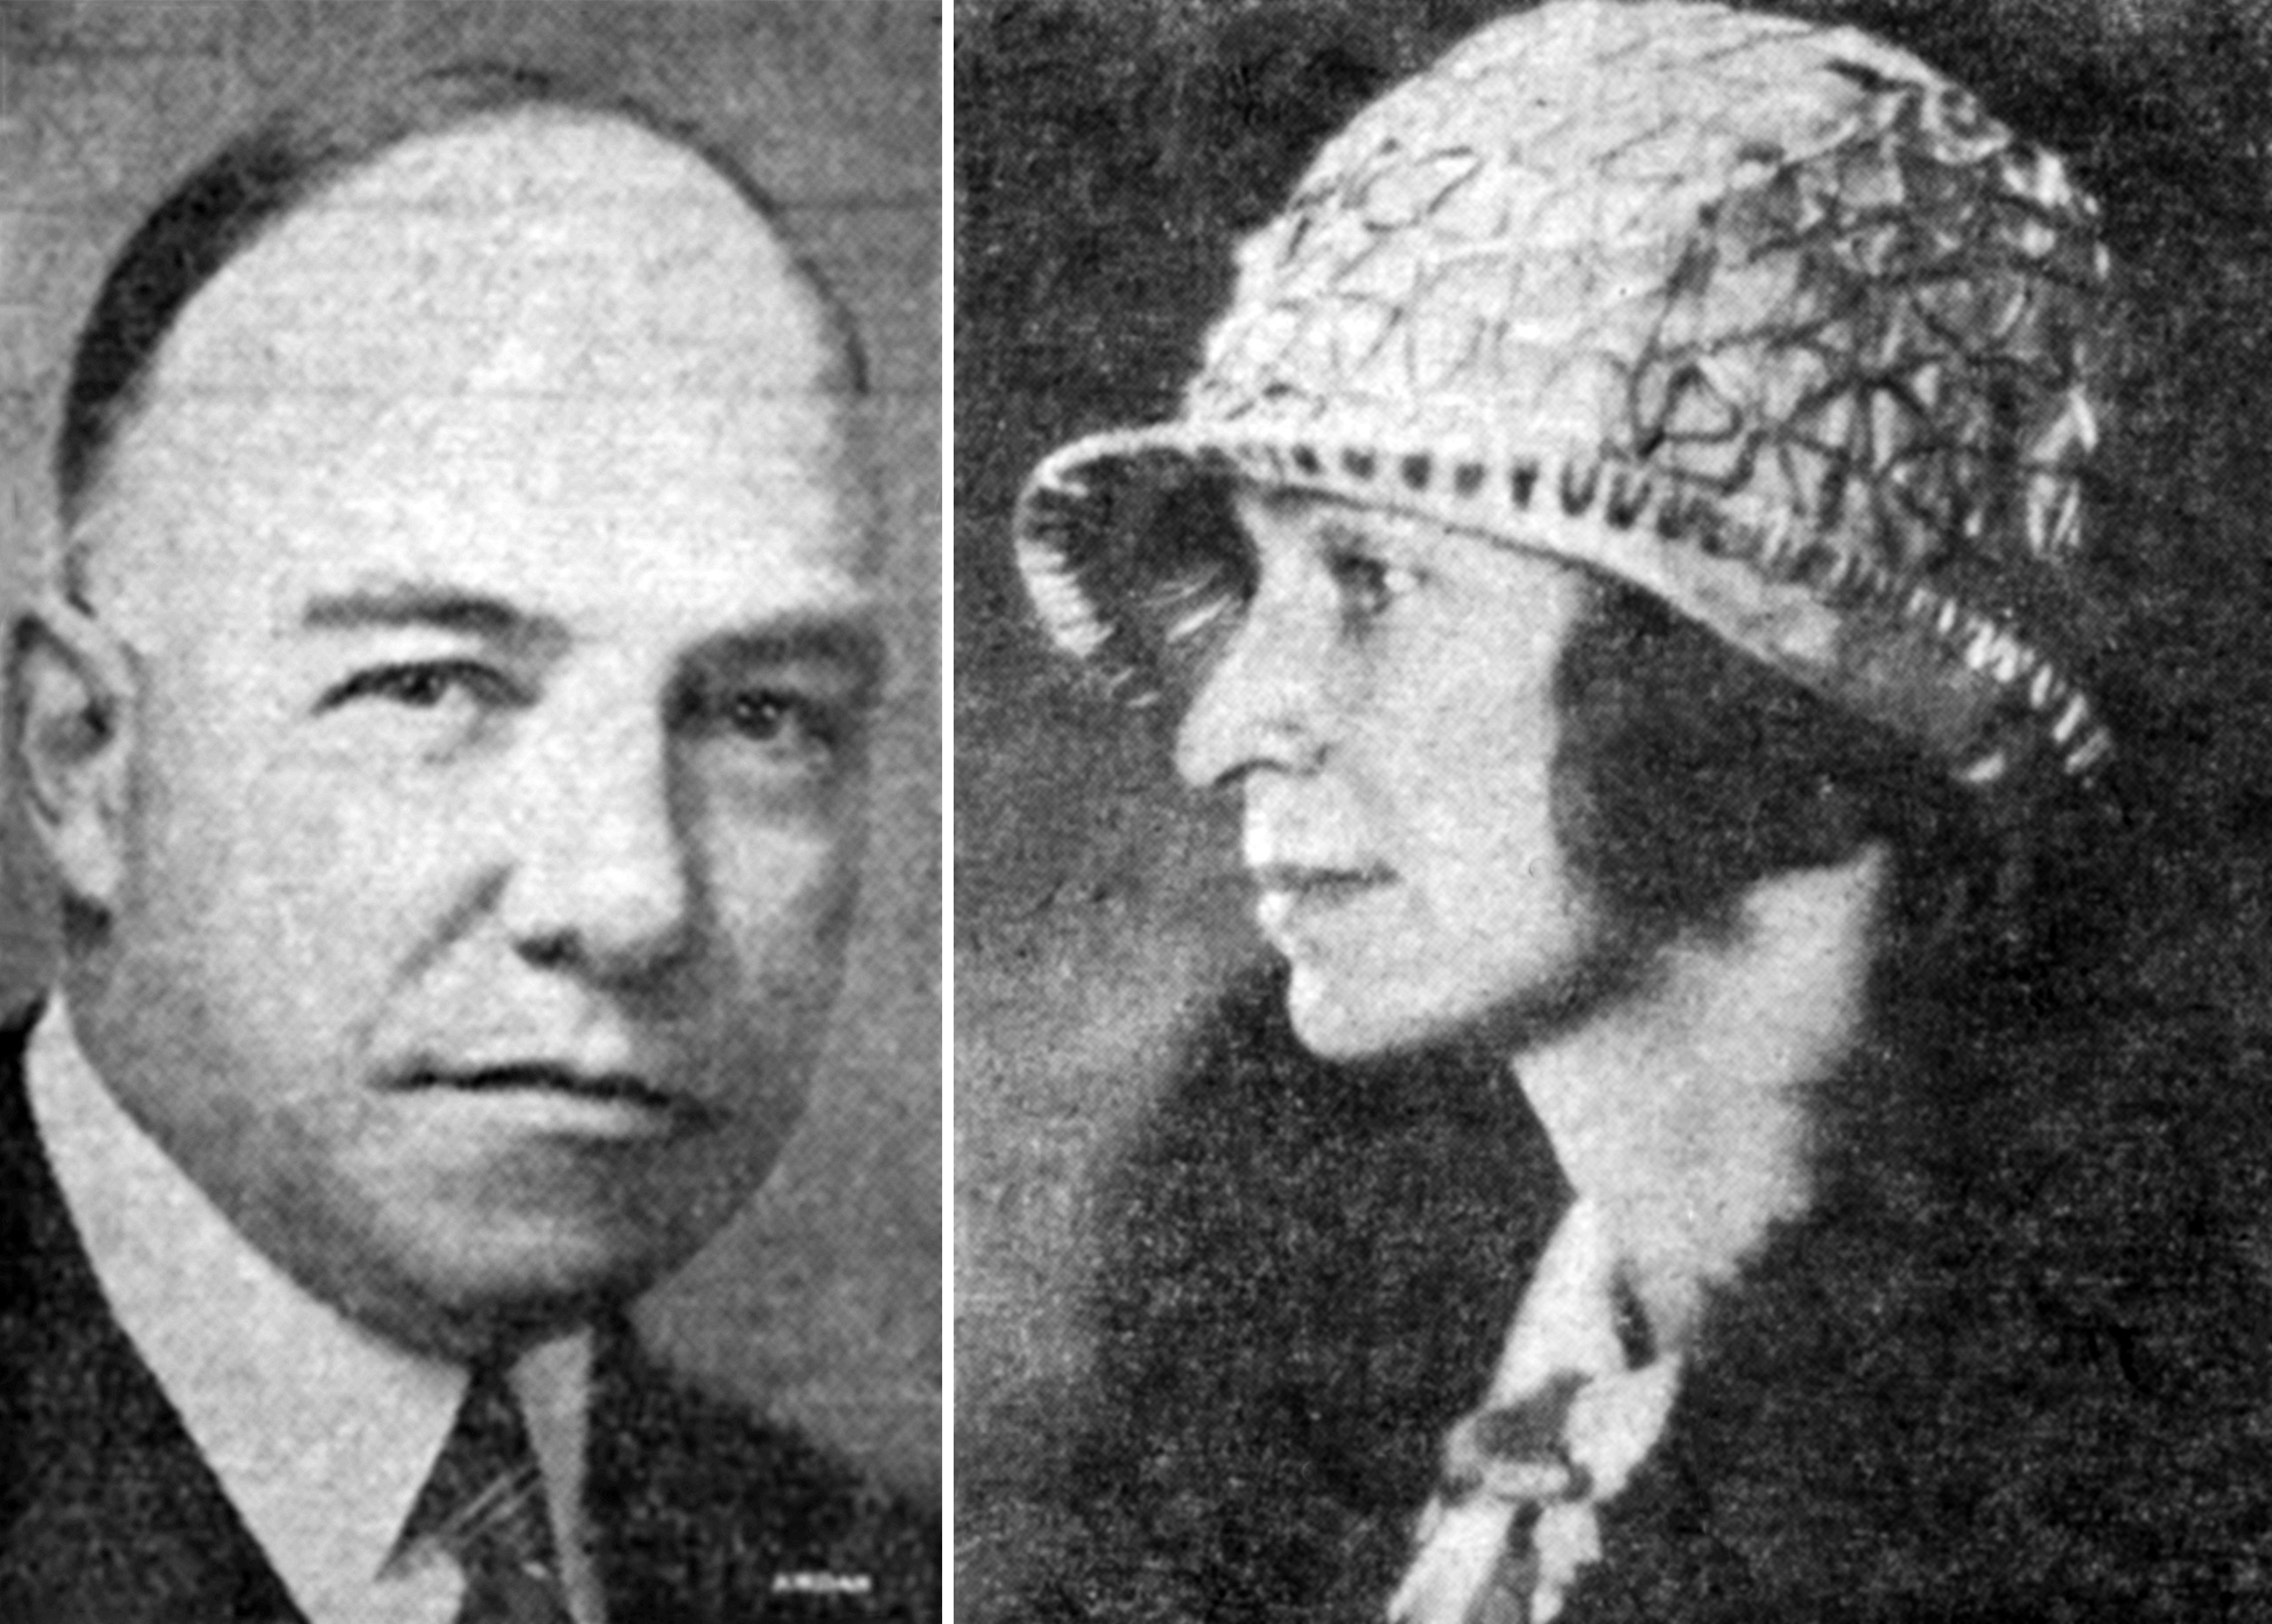 Dr. Harold Vincent Bickmore and Miss Laura Amanda Goding lived at 123 Congress St. after they were wed in 1926.